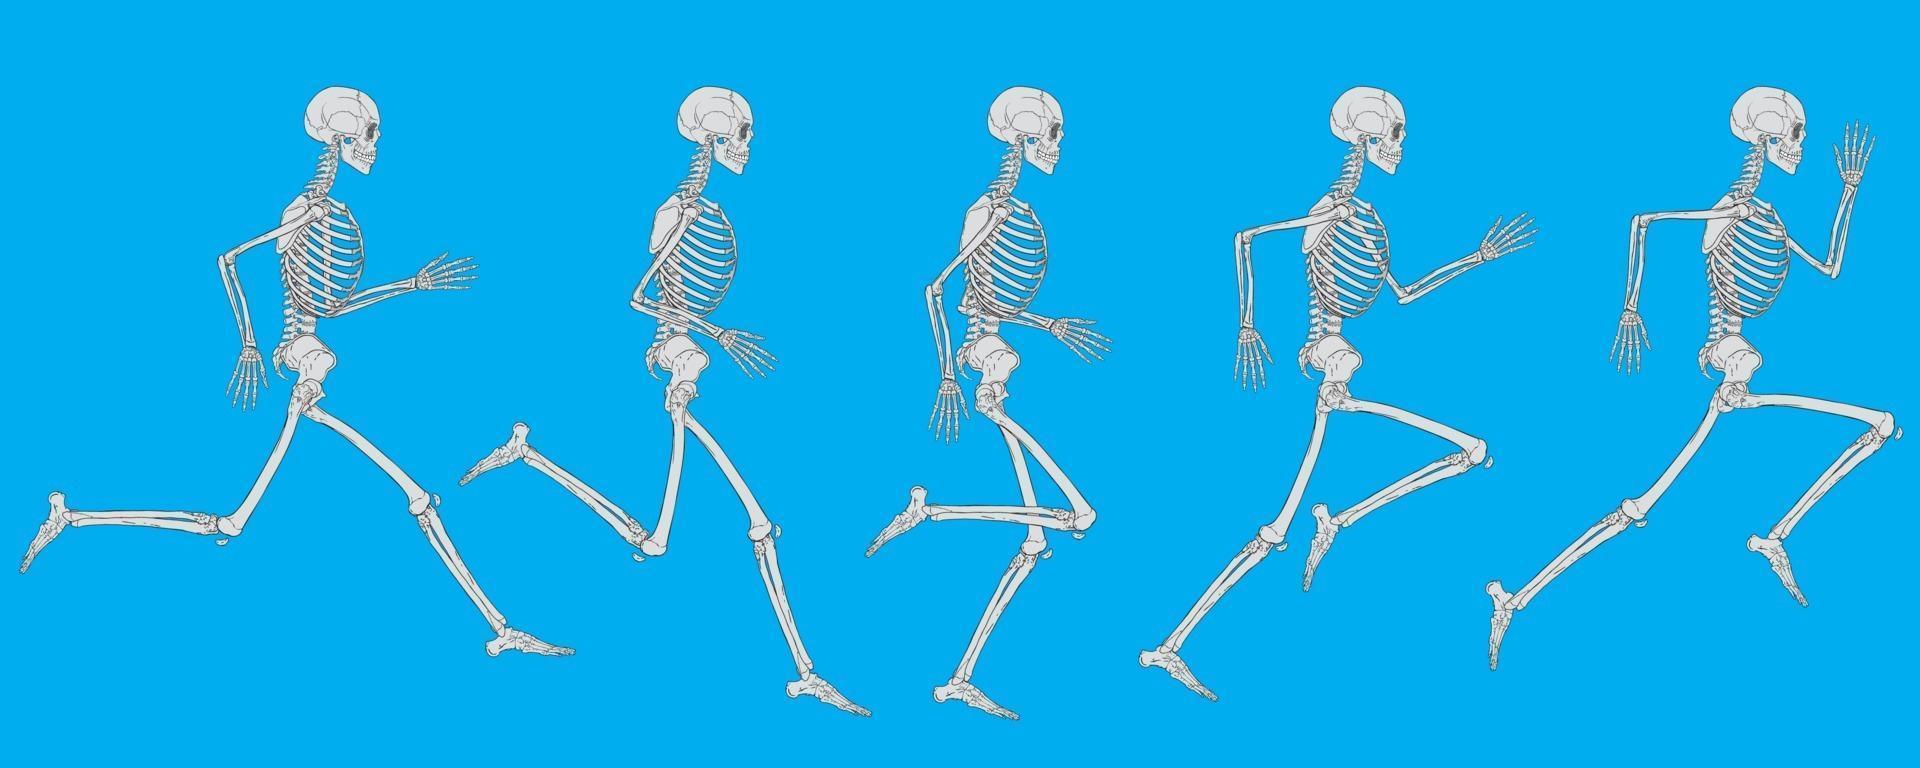 Running Cycle Of White Human Skeleton On Blue Background Vector Drawing